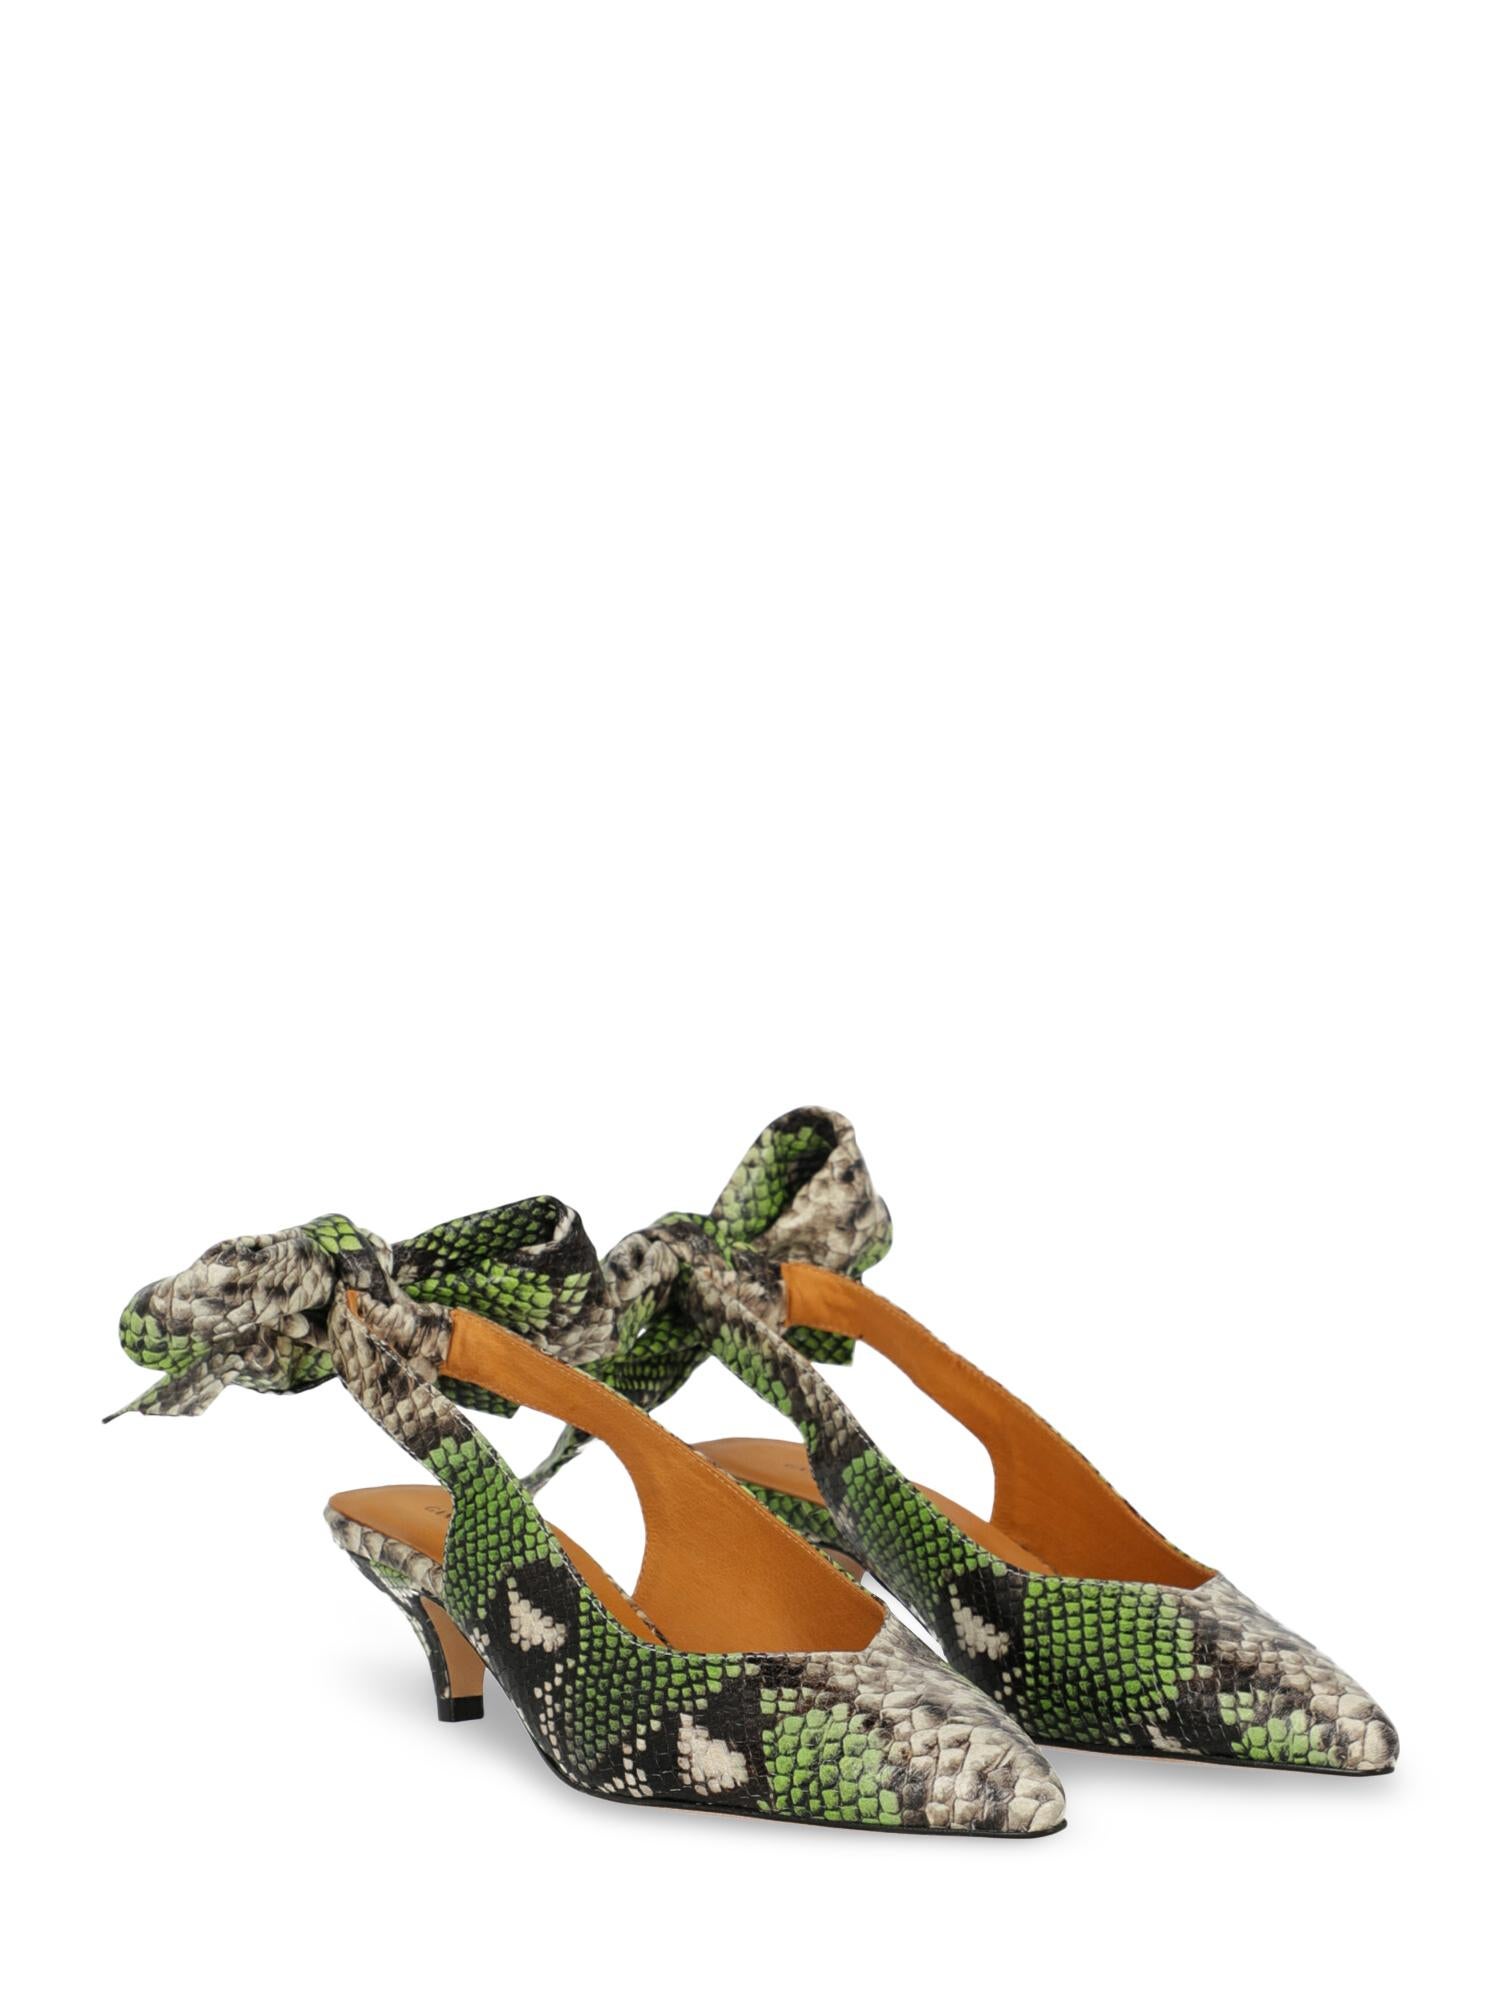 Mules, leather, snake print, shiny effect, backless design, slingback strap, pointed toe, branded insole, tapered heel, mid heel, leather lining, bow detail. Product Condition: Excellent. Insole: slightly visible stain
